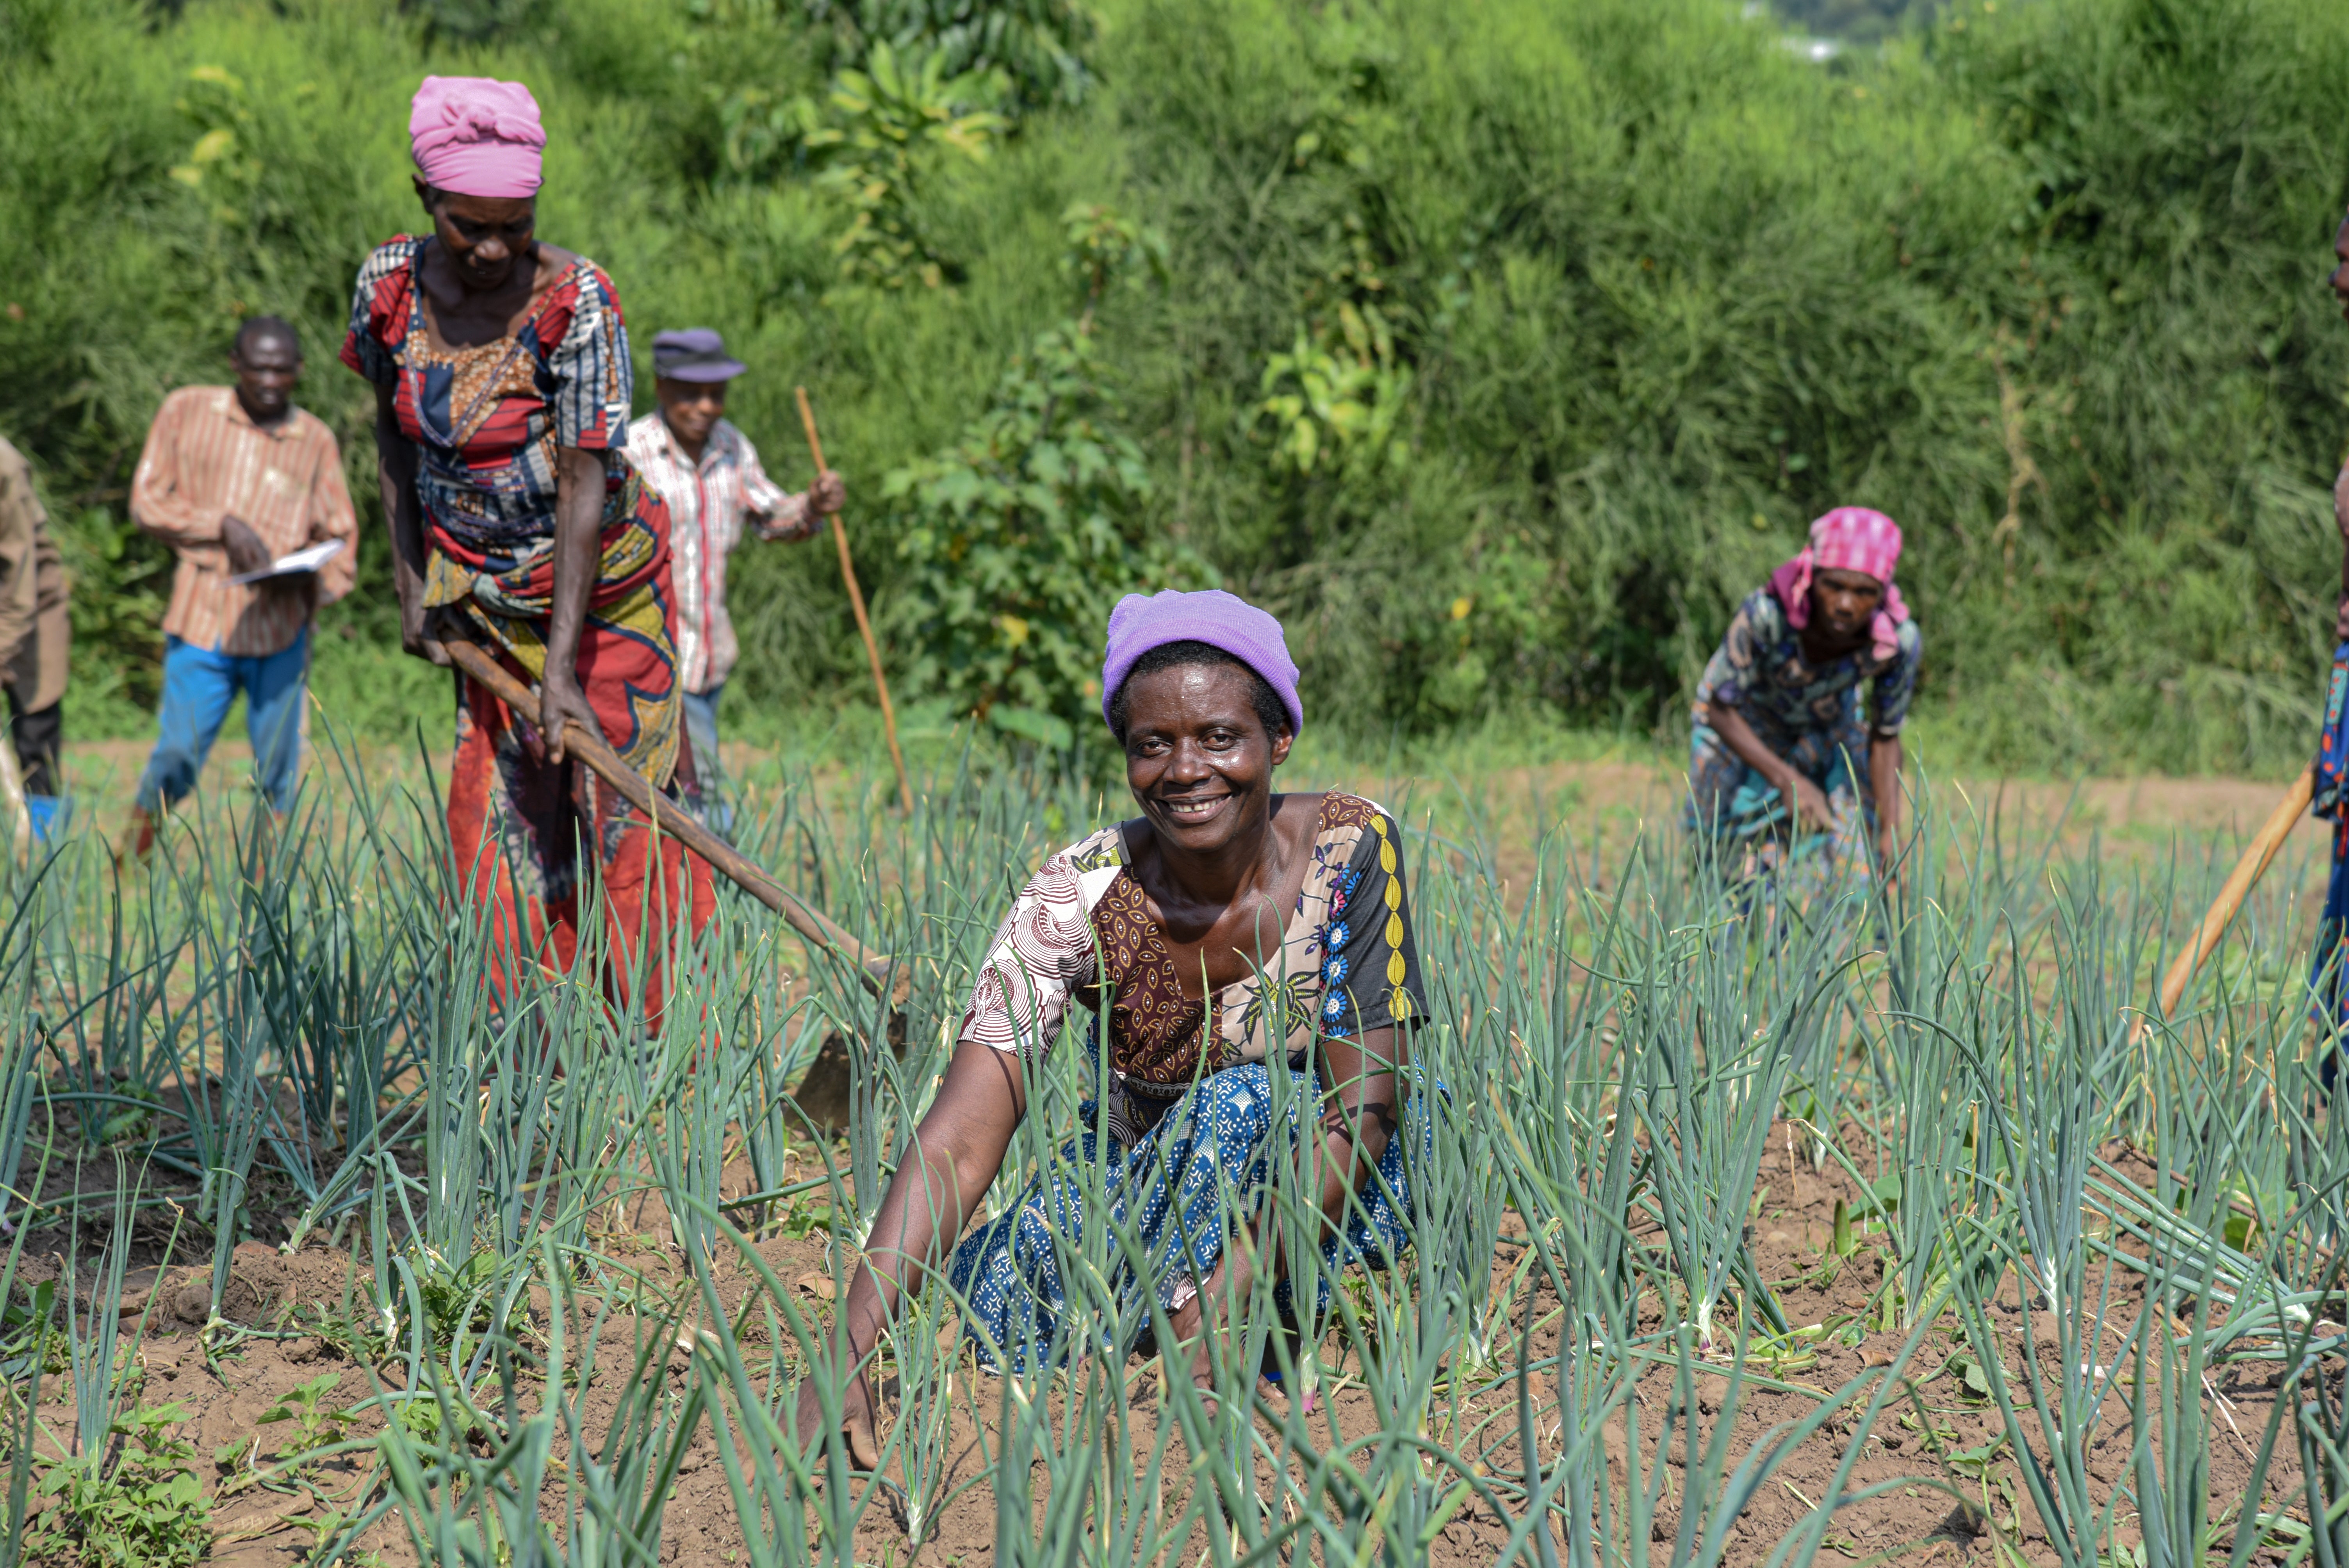 A women smiles as she kneels in her farm field. Behind her others work the fields.